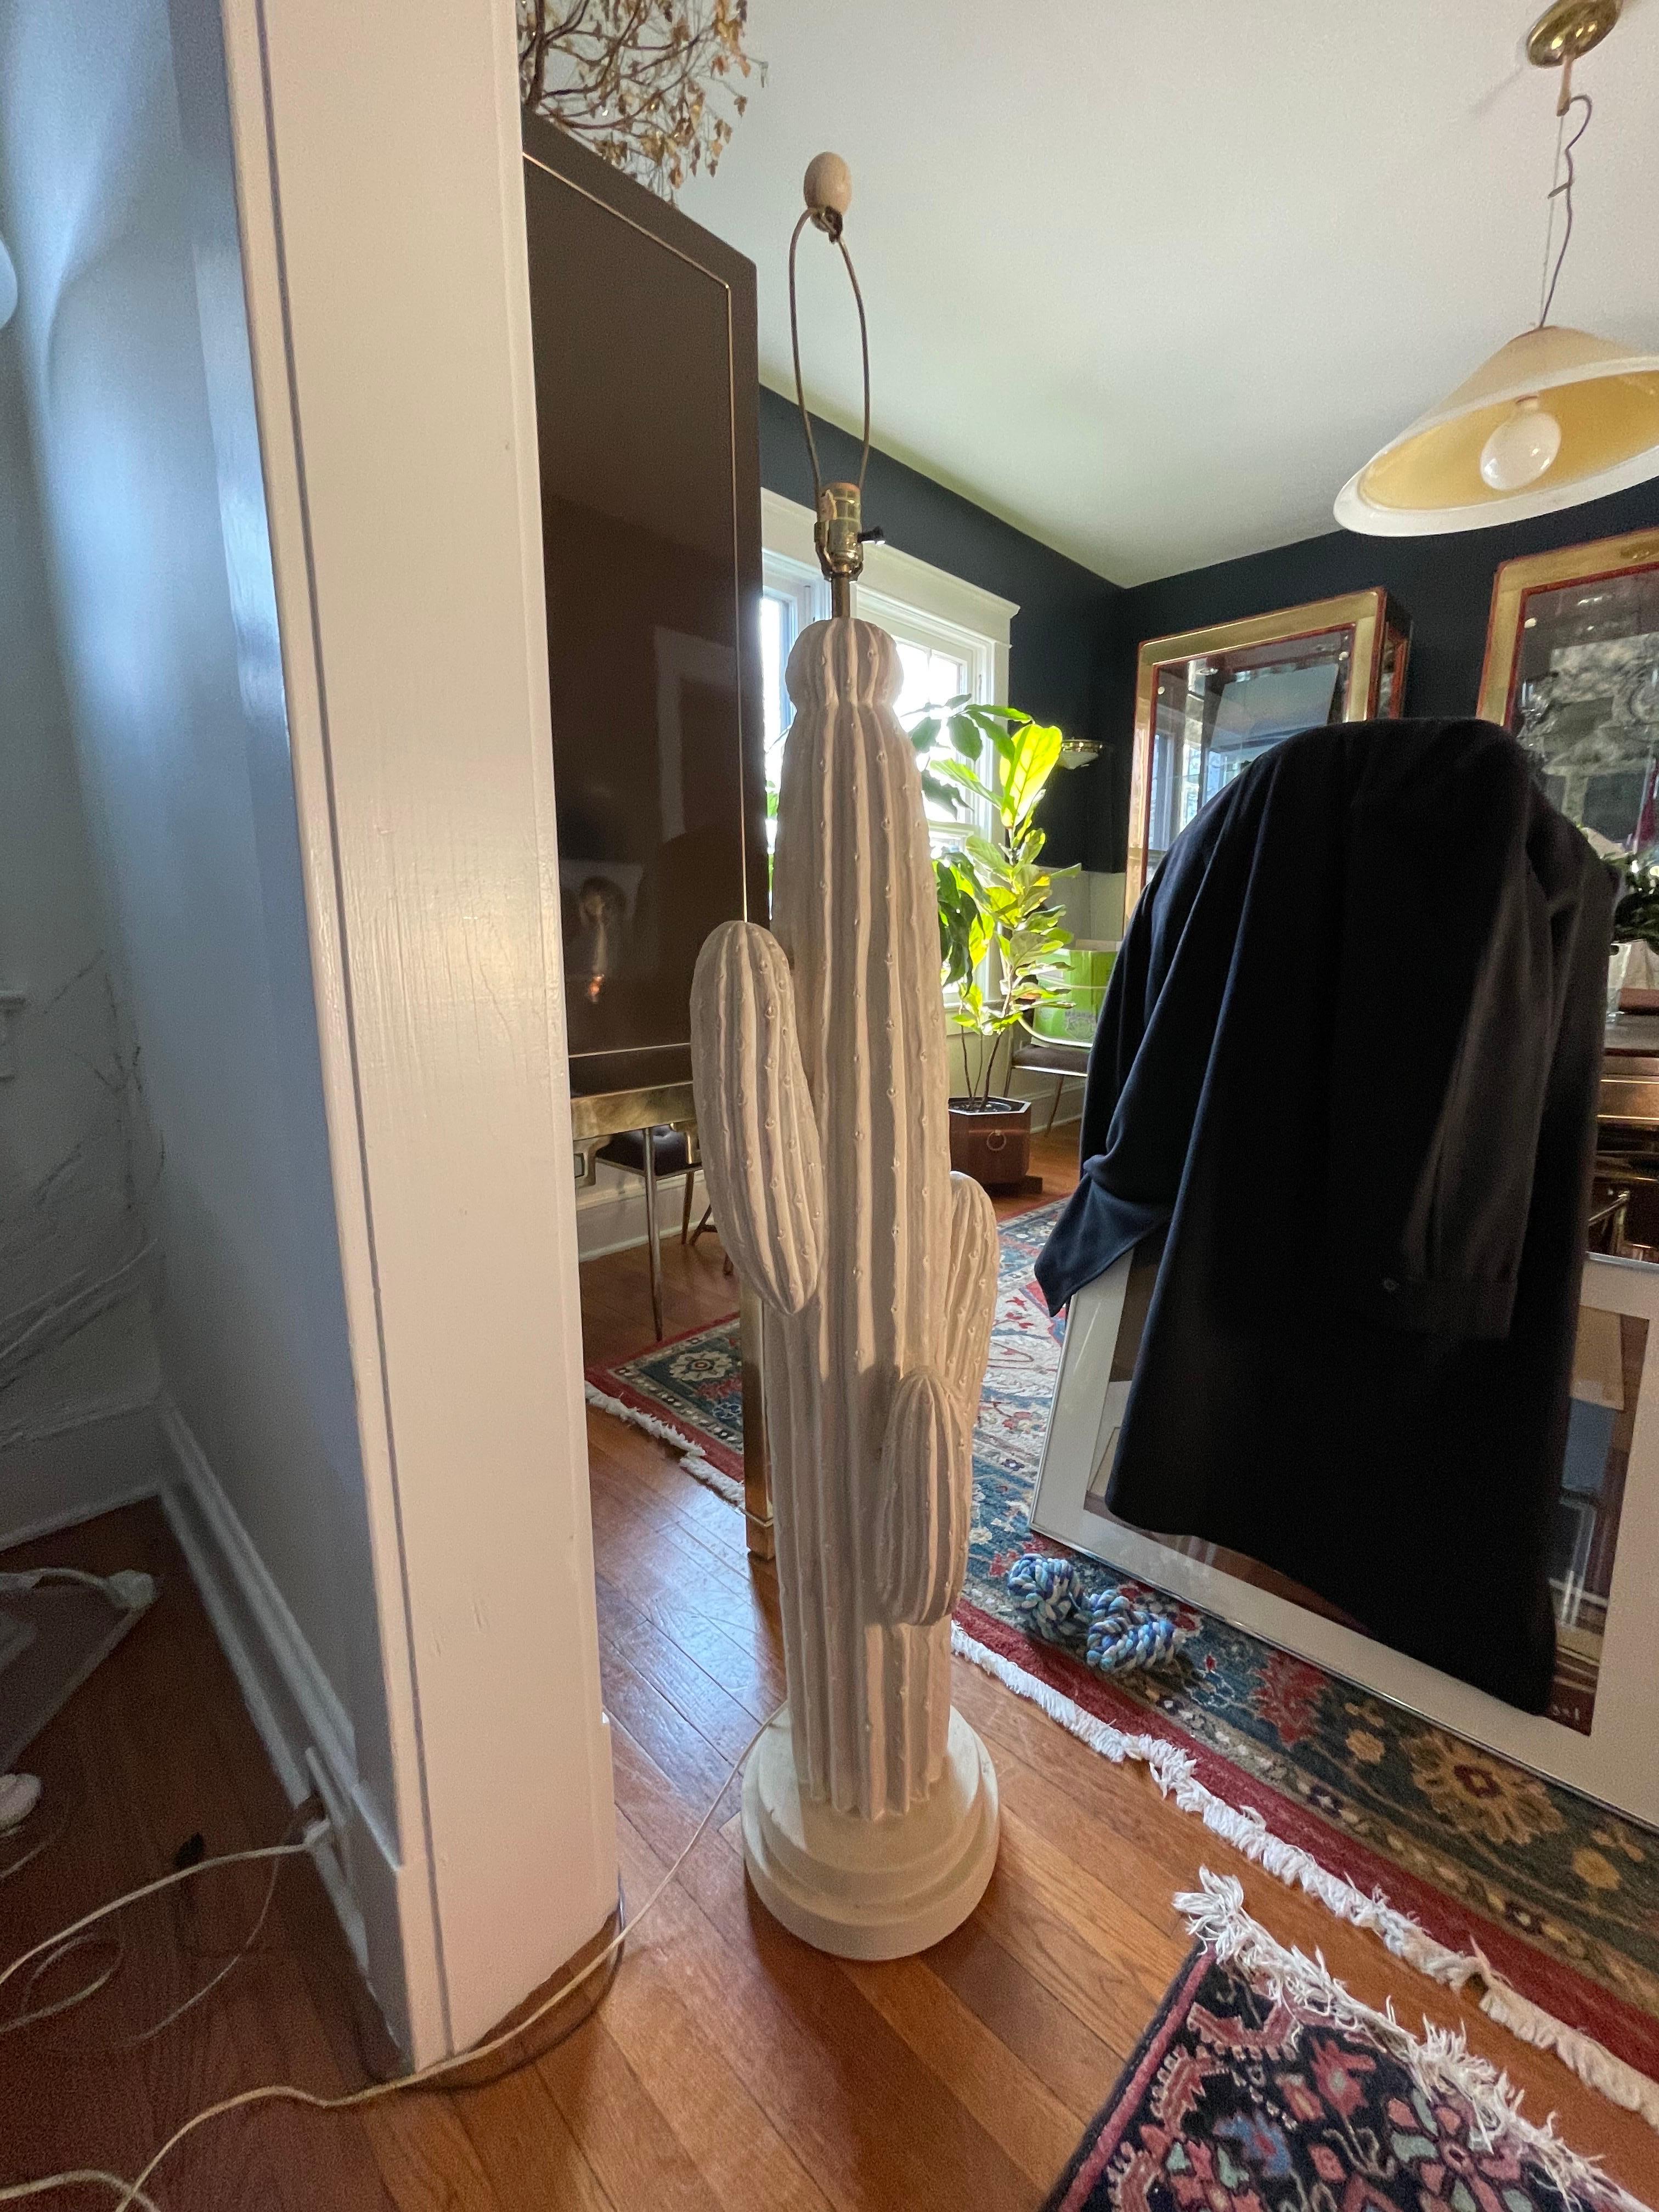 Fantastic vintage plaster floor lamp. A boho cactus shape in a pale toupe cerused finish. Acquired from a Jersey Shore estate.